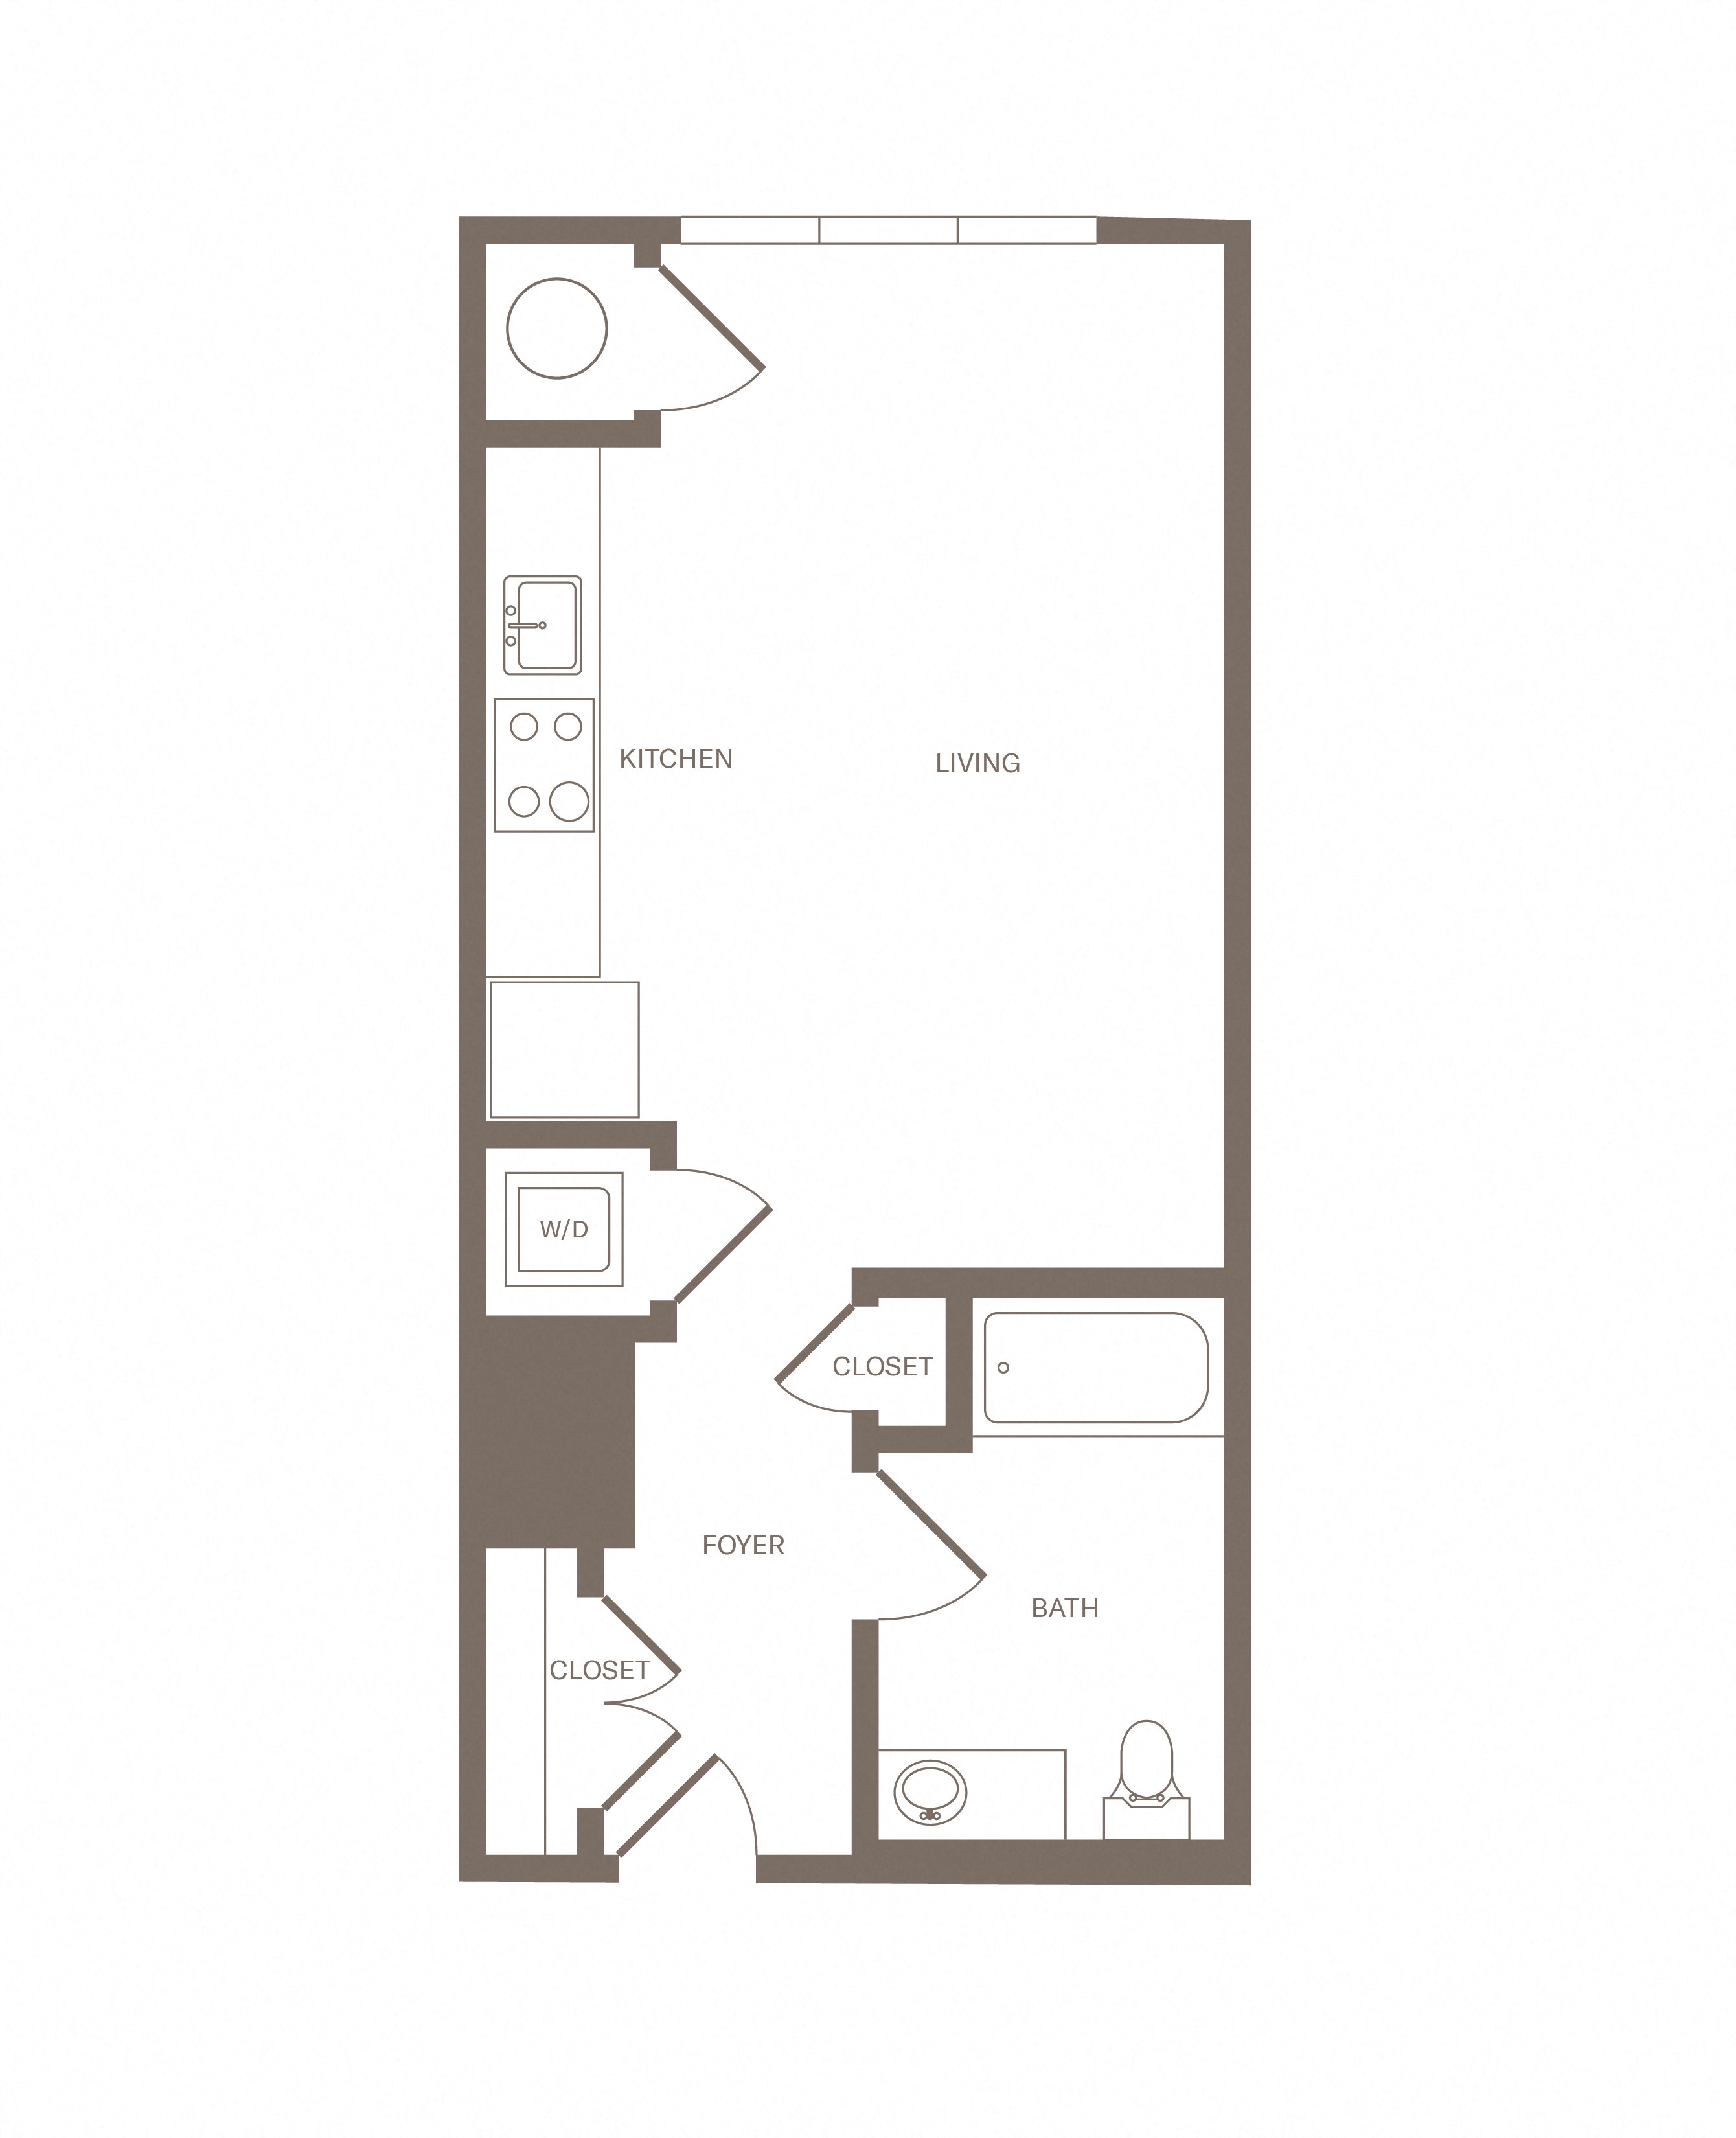 Floorplan for Apartment #1406, 0 bedroom unit at Halstead Parsippany